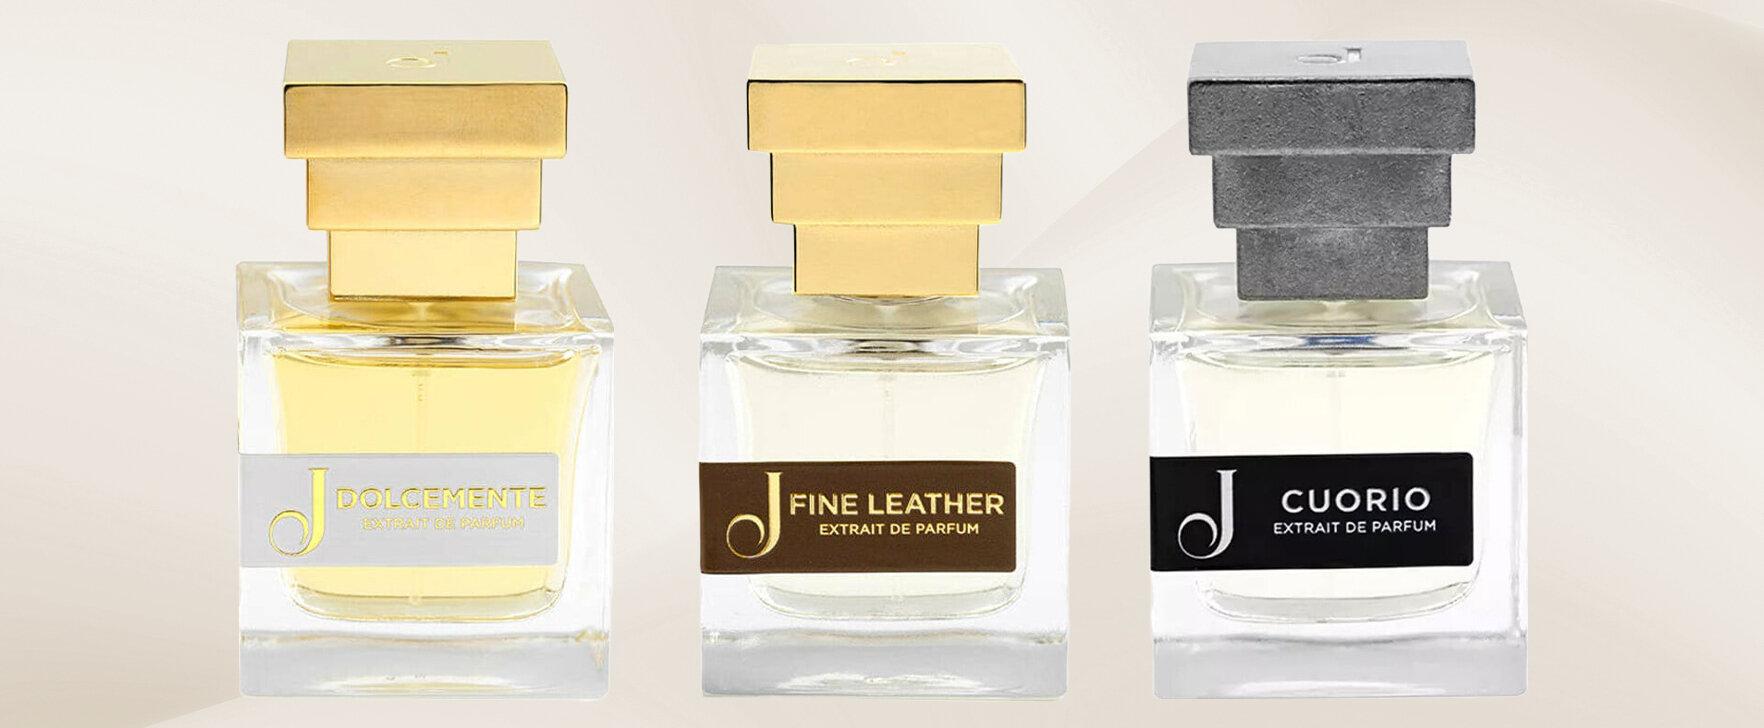 "Dolcemente", "Fine Leather" and "Cuorio": The New Extraits de Parfum From Jupilò